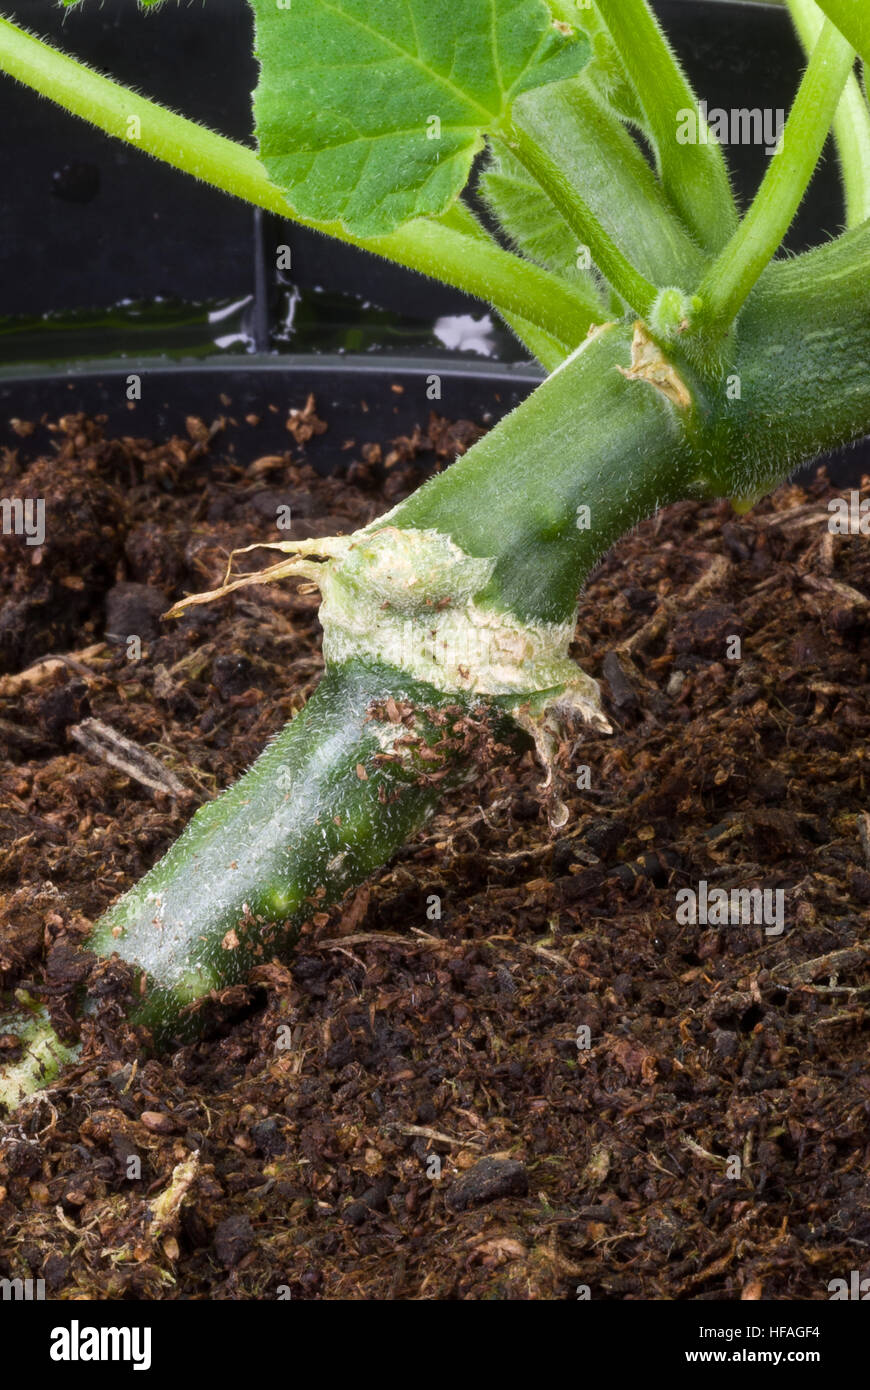 Squash ‘Autumn Crown’ grafted on ‘Bodyguard’, graft root joint vegetable, educational picture of grafting plants, garden trend Stock Photo